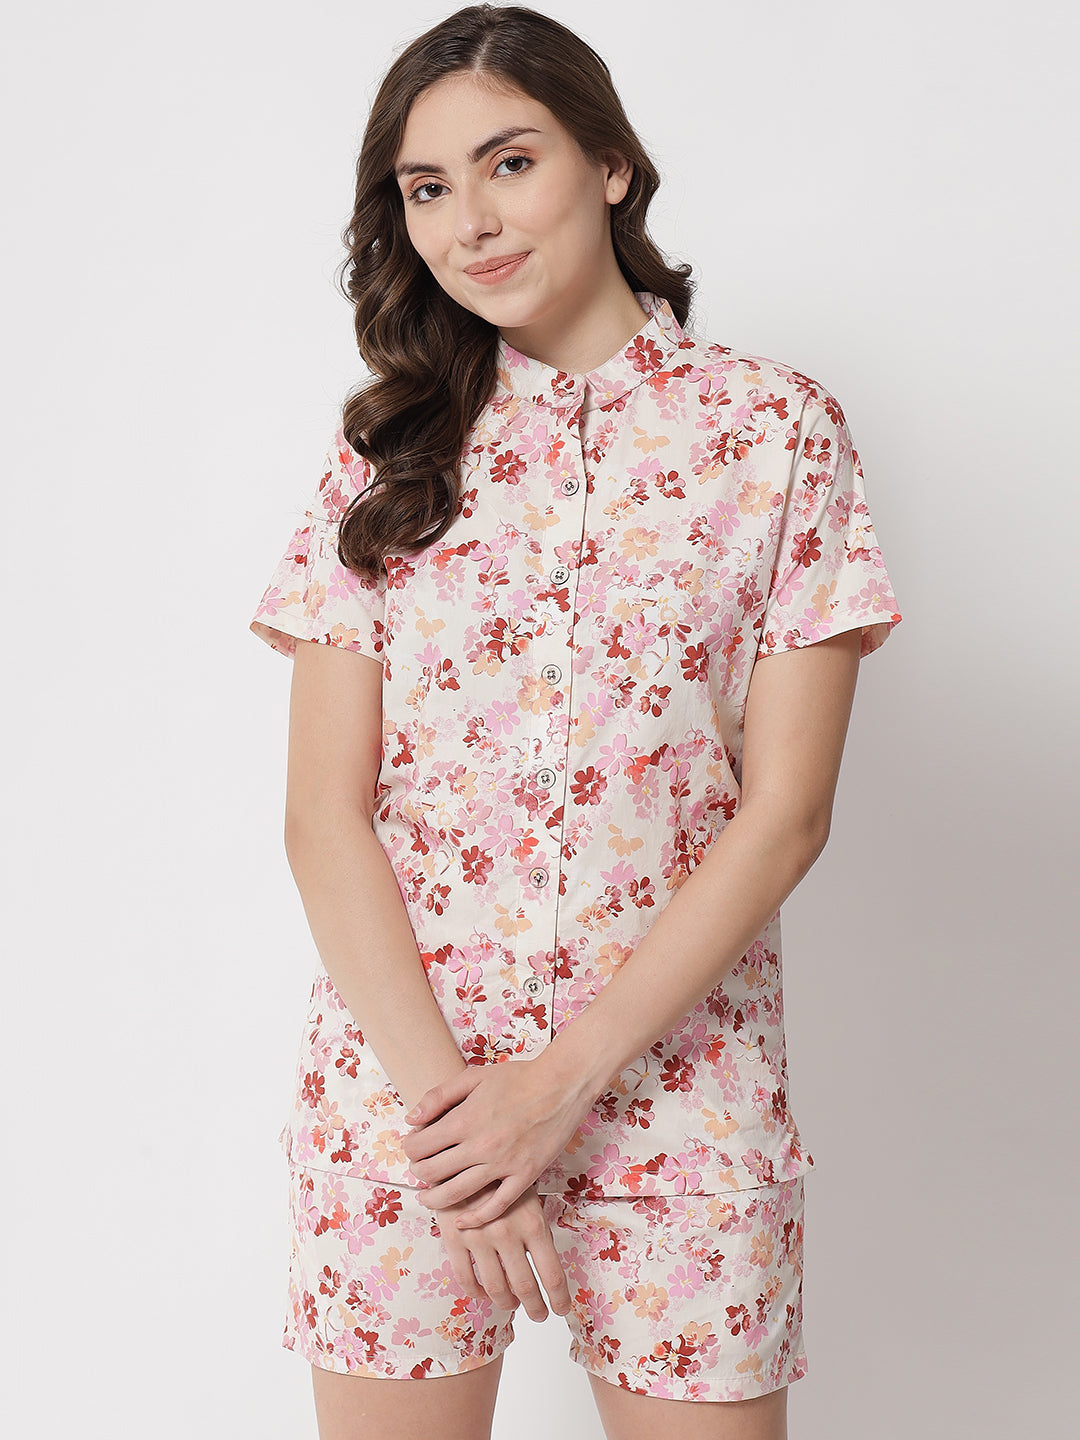 floral printed top & shorts nightsuit set for plus size women